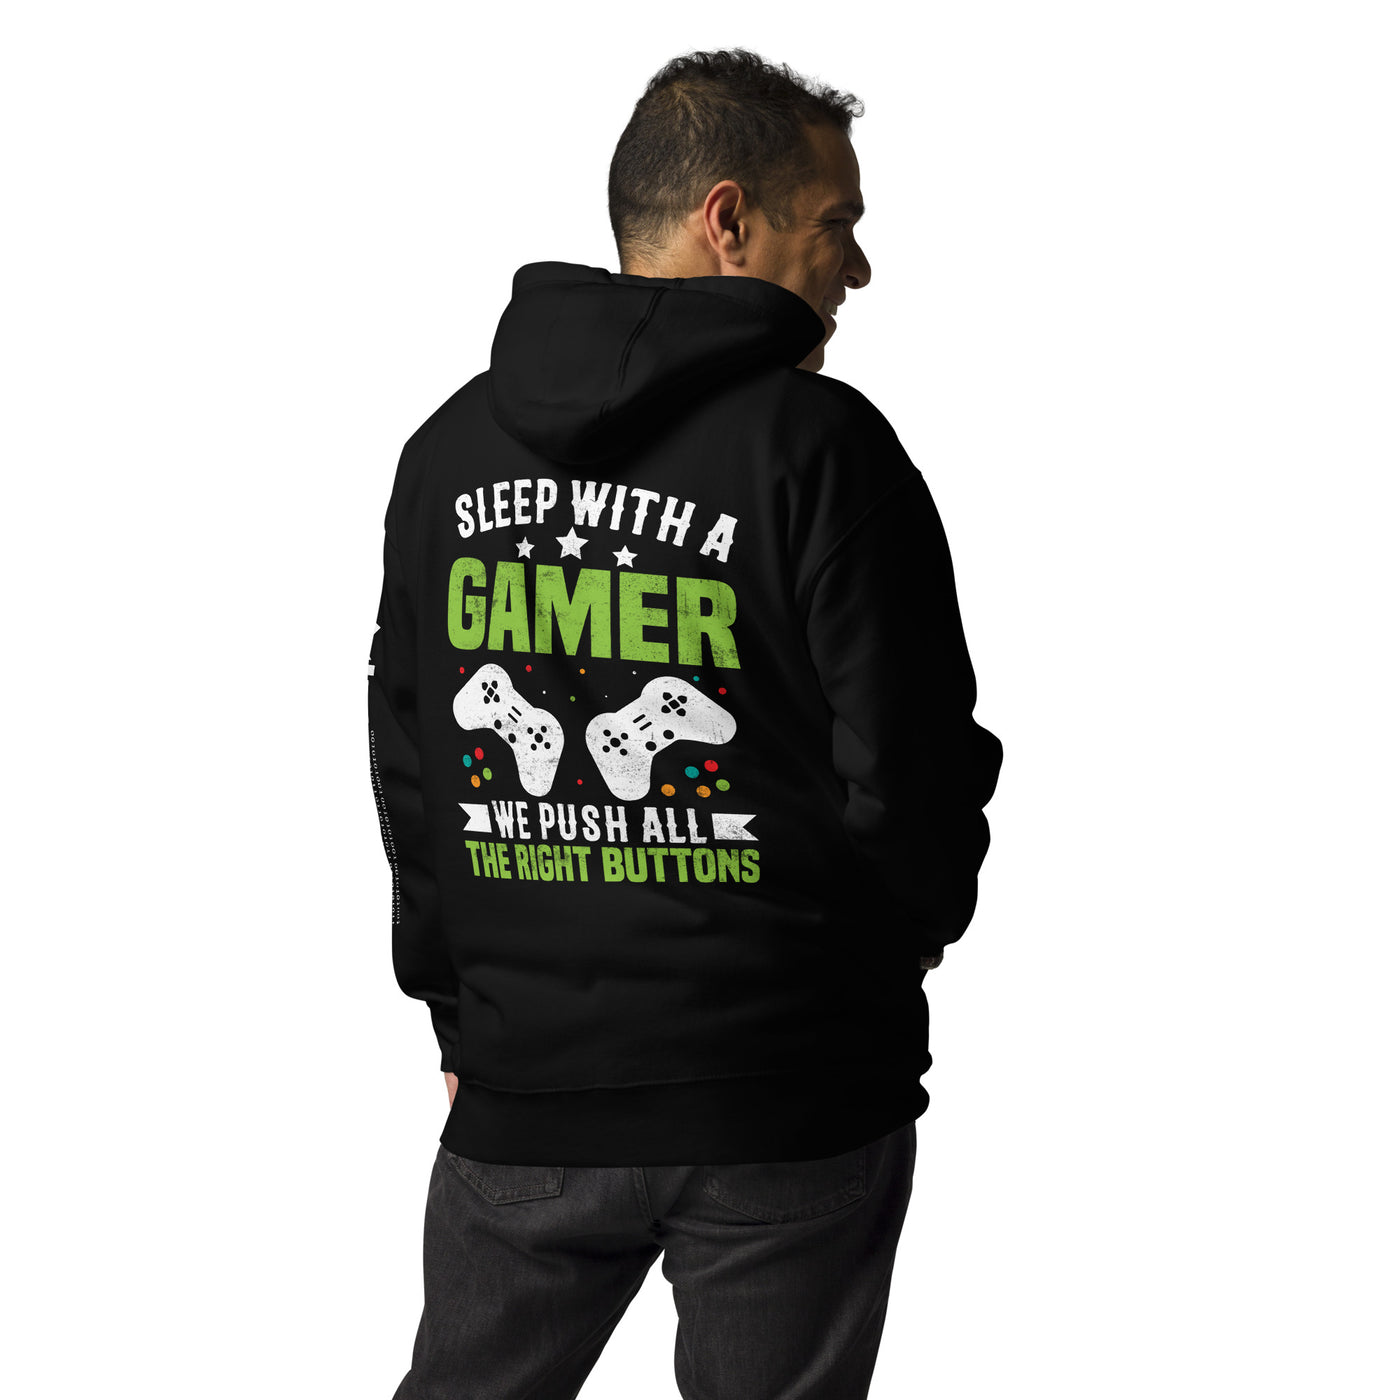 Sleep With a Gamer, We Push all the Right Button  Unisex Hoodie